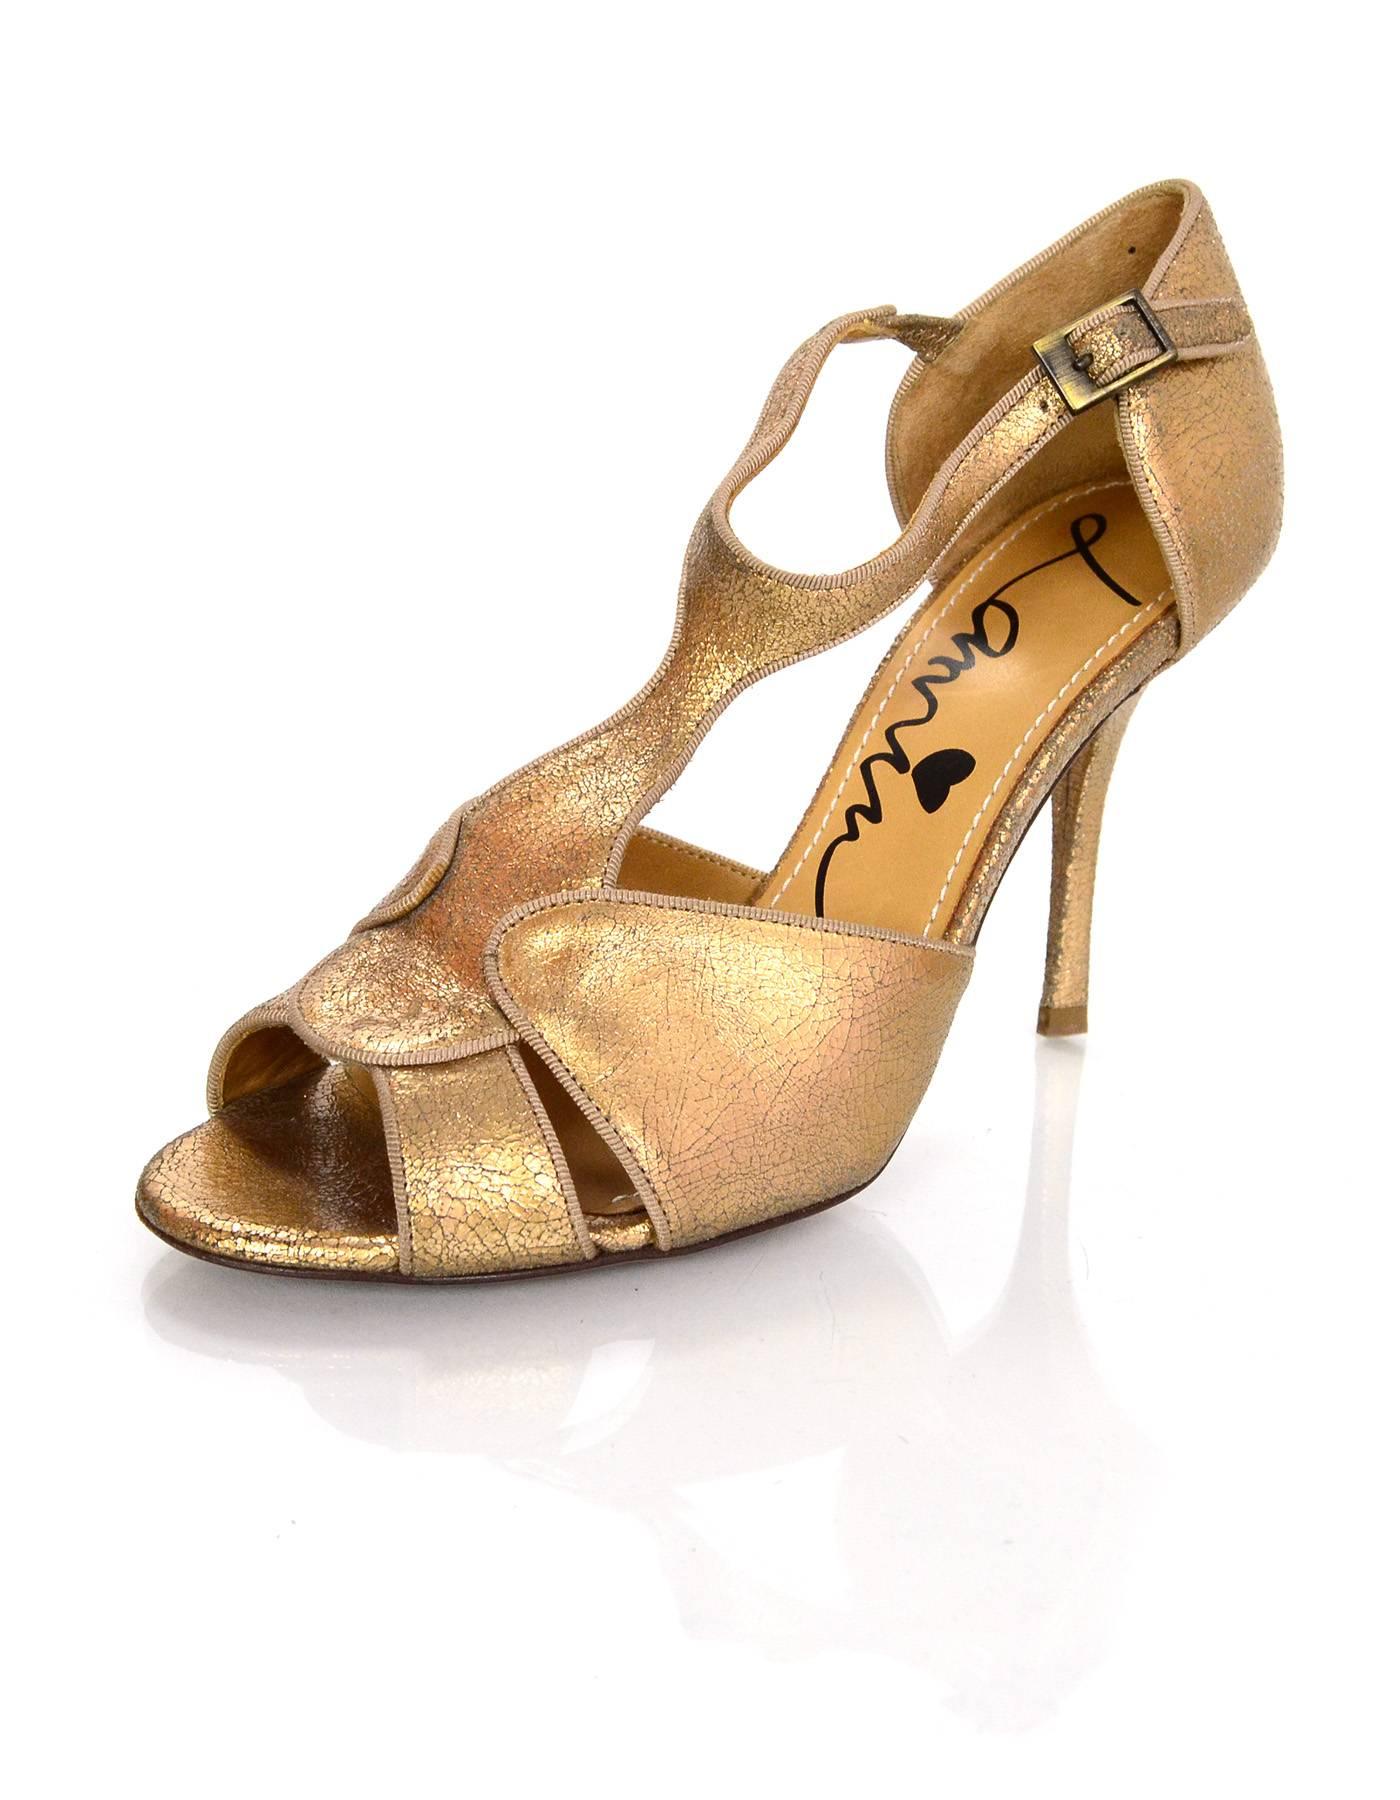 Lanvin Gold Distressed T-Strap Sandals
Features distressed crackle effect throughout

Made In: Italy
Color: Gold
Materials: Distressed leather
Closure/Opening: Ankle strap with buckle and notch closure
Sole Stamp: Vero Cuoio Made in Italy38
Overall